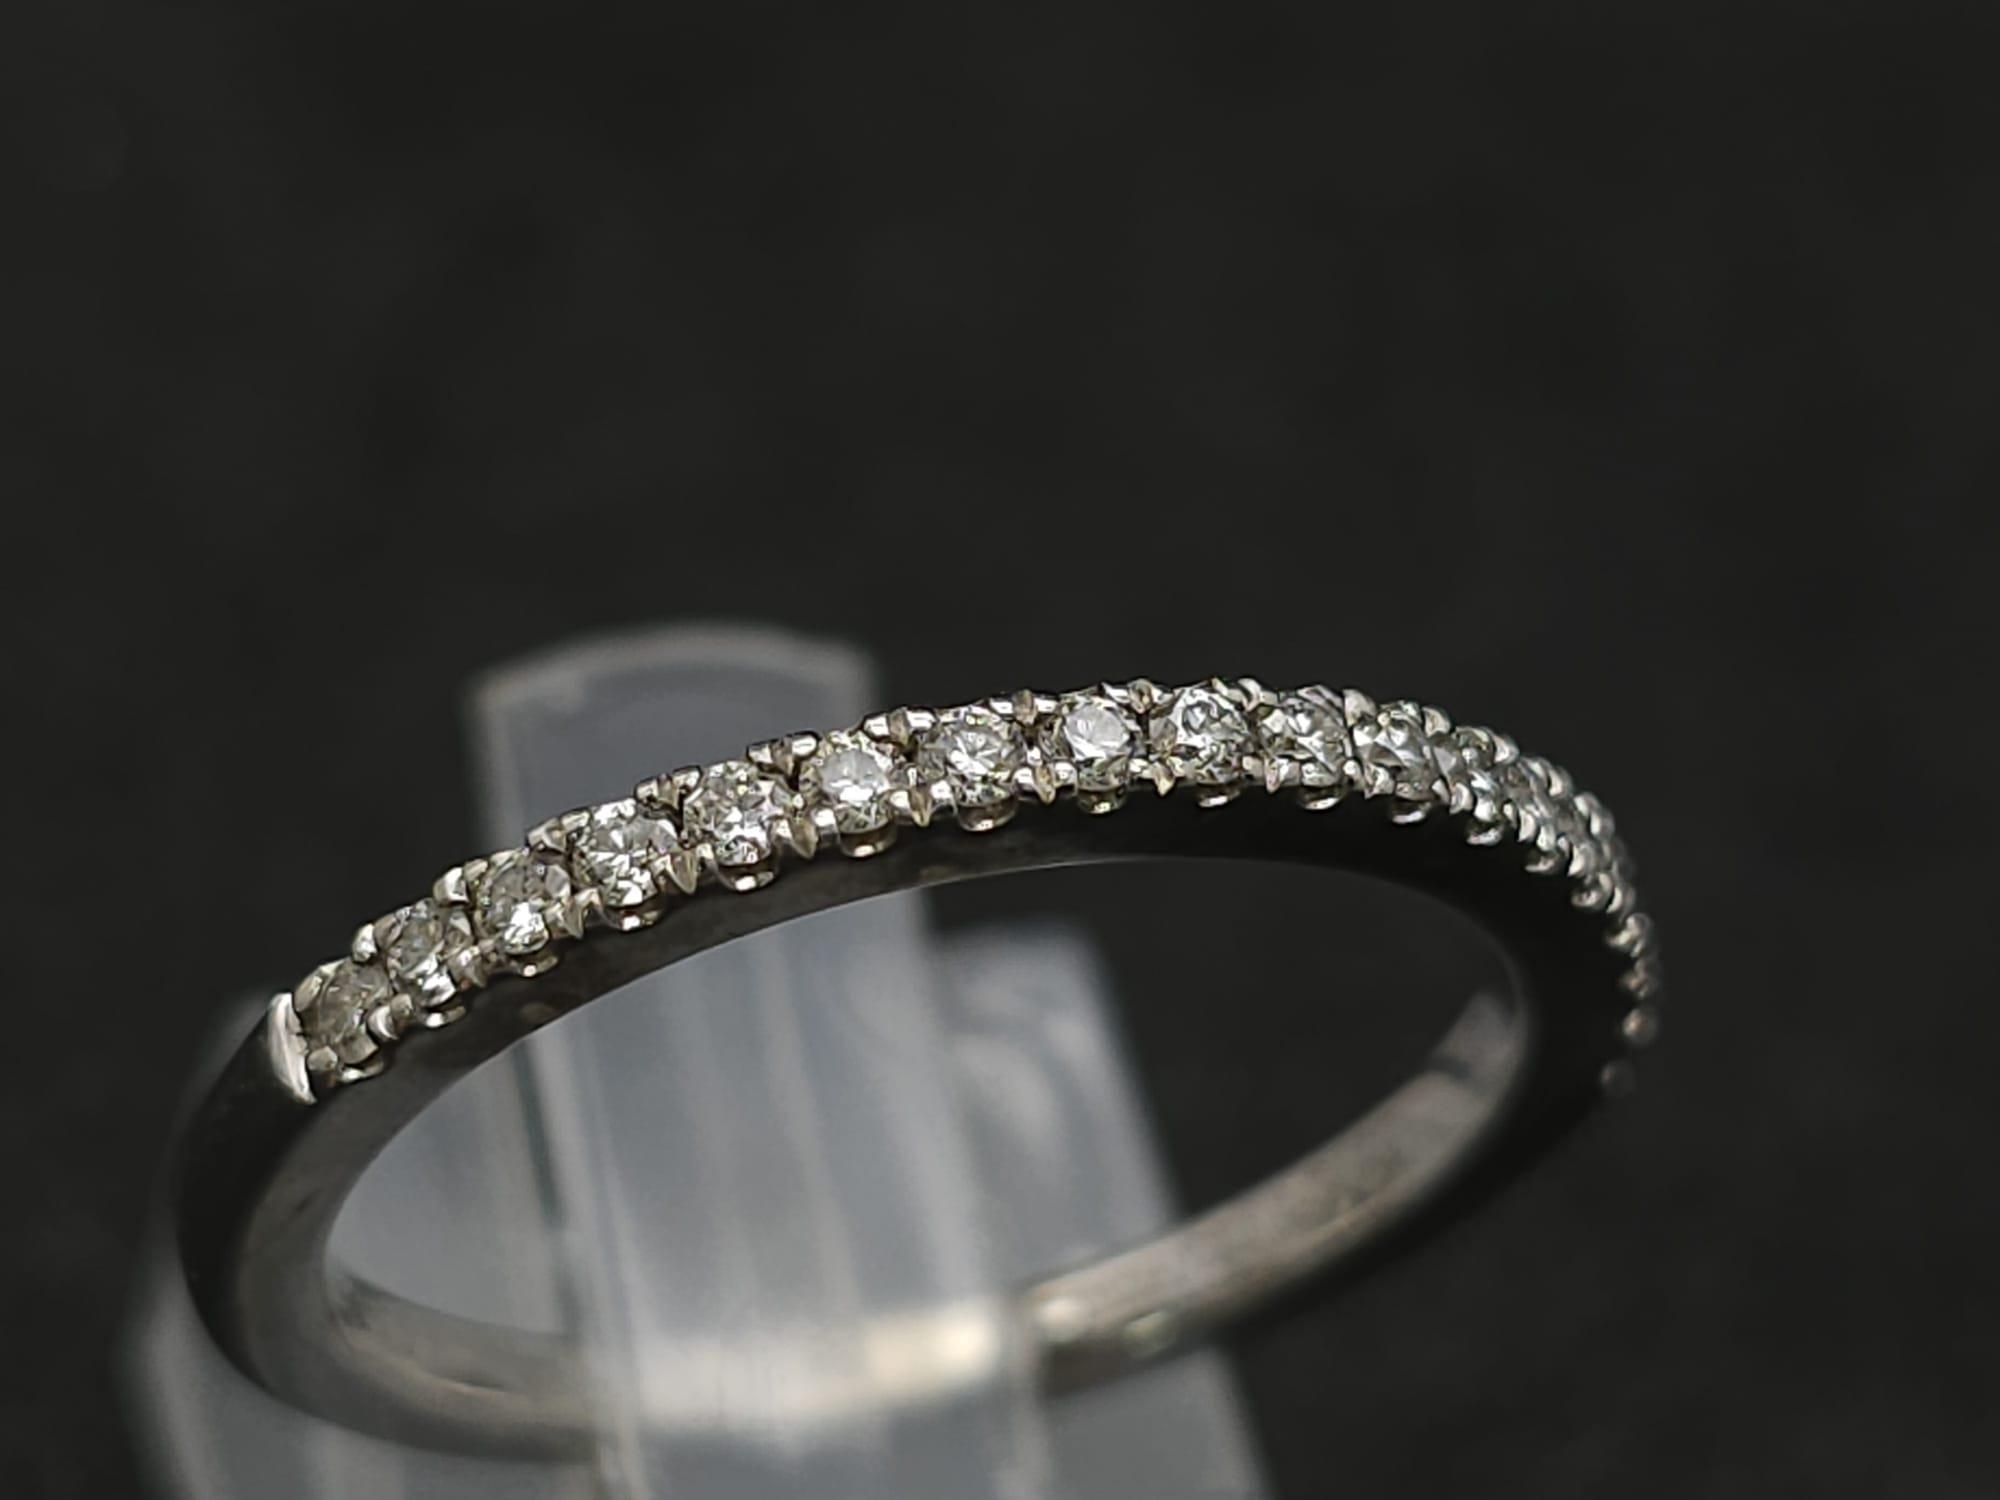 18K WHITE GOLD 0.23CT DIAMOND BAND RING ""YOU KNOW THE NAME"" VERA WANG FROM THE LOVE COLLECTION. - Image 3 of 8